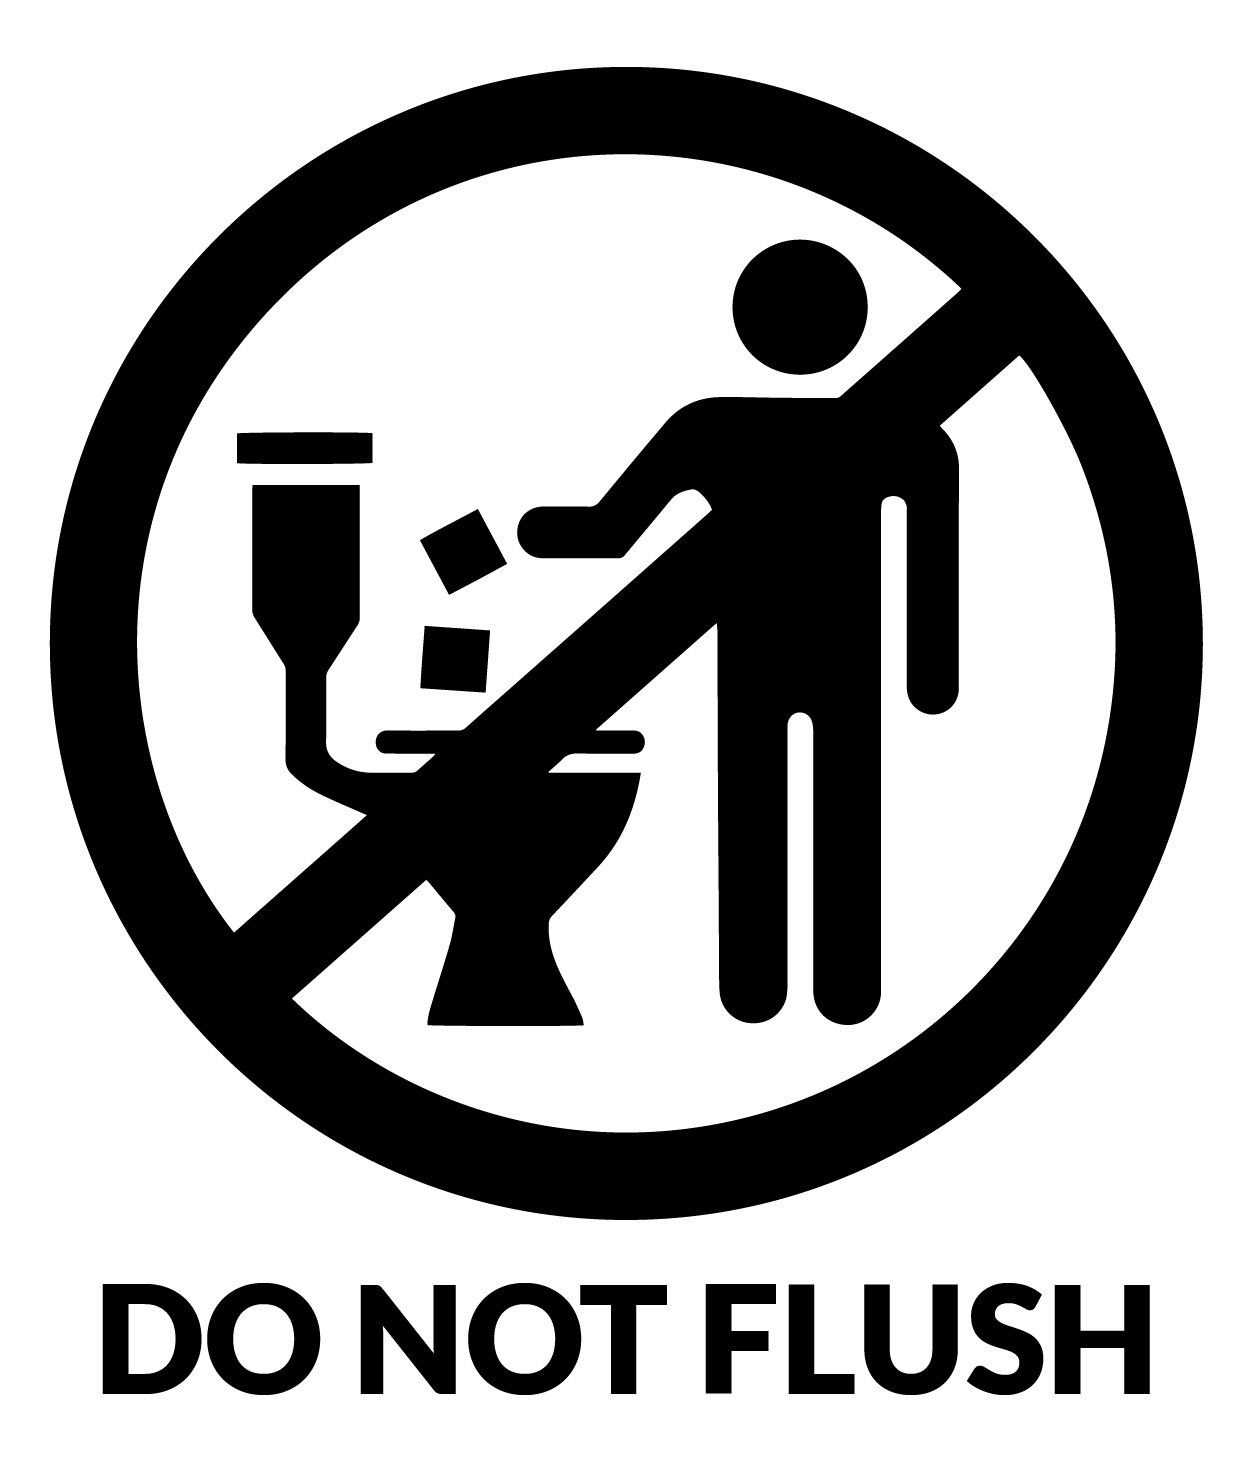 If you see the "Do Not Flush" symbol on wipes packaging, dispose of them in the trash and never the toilet.